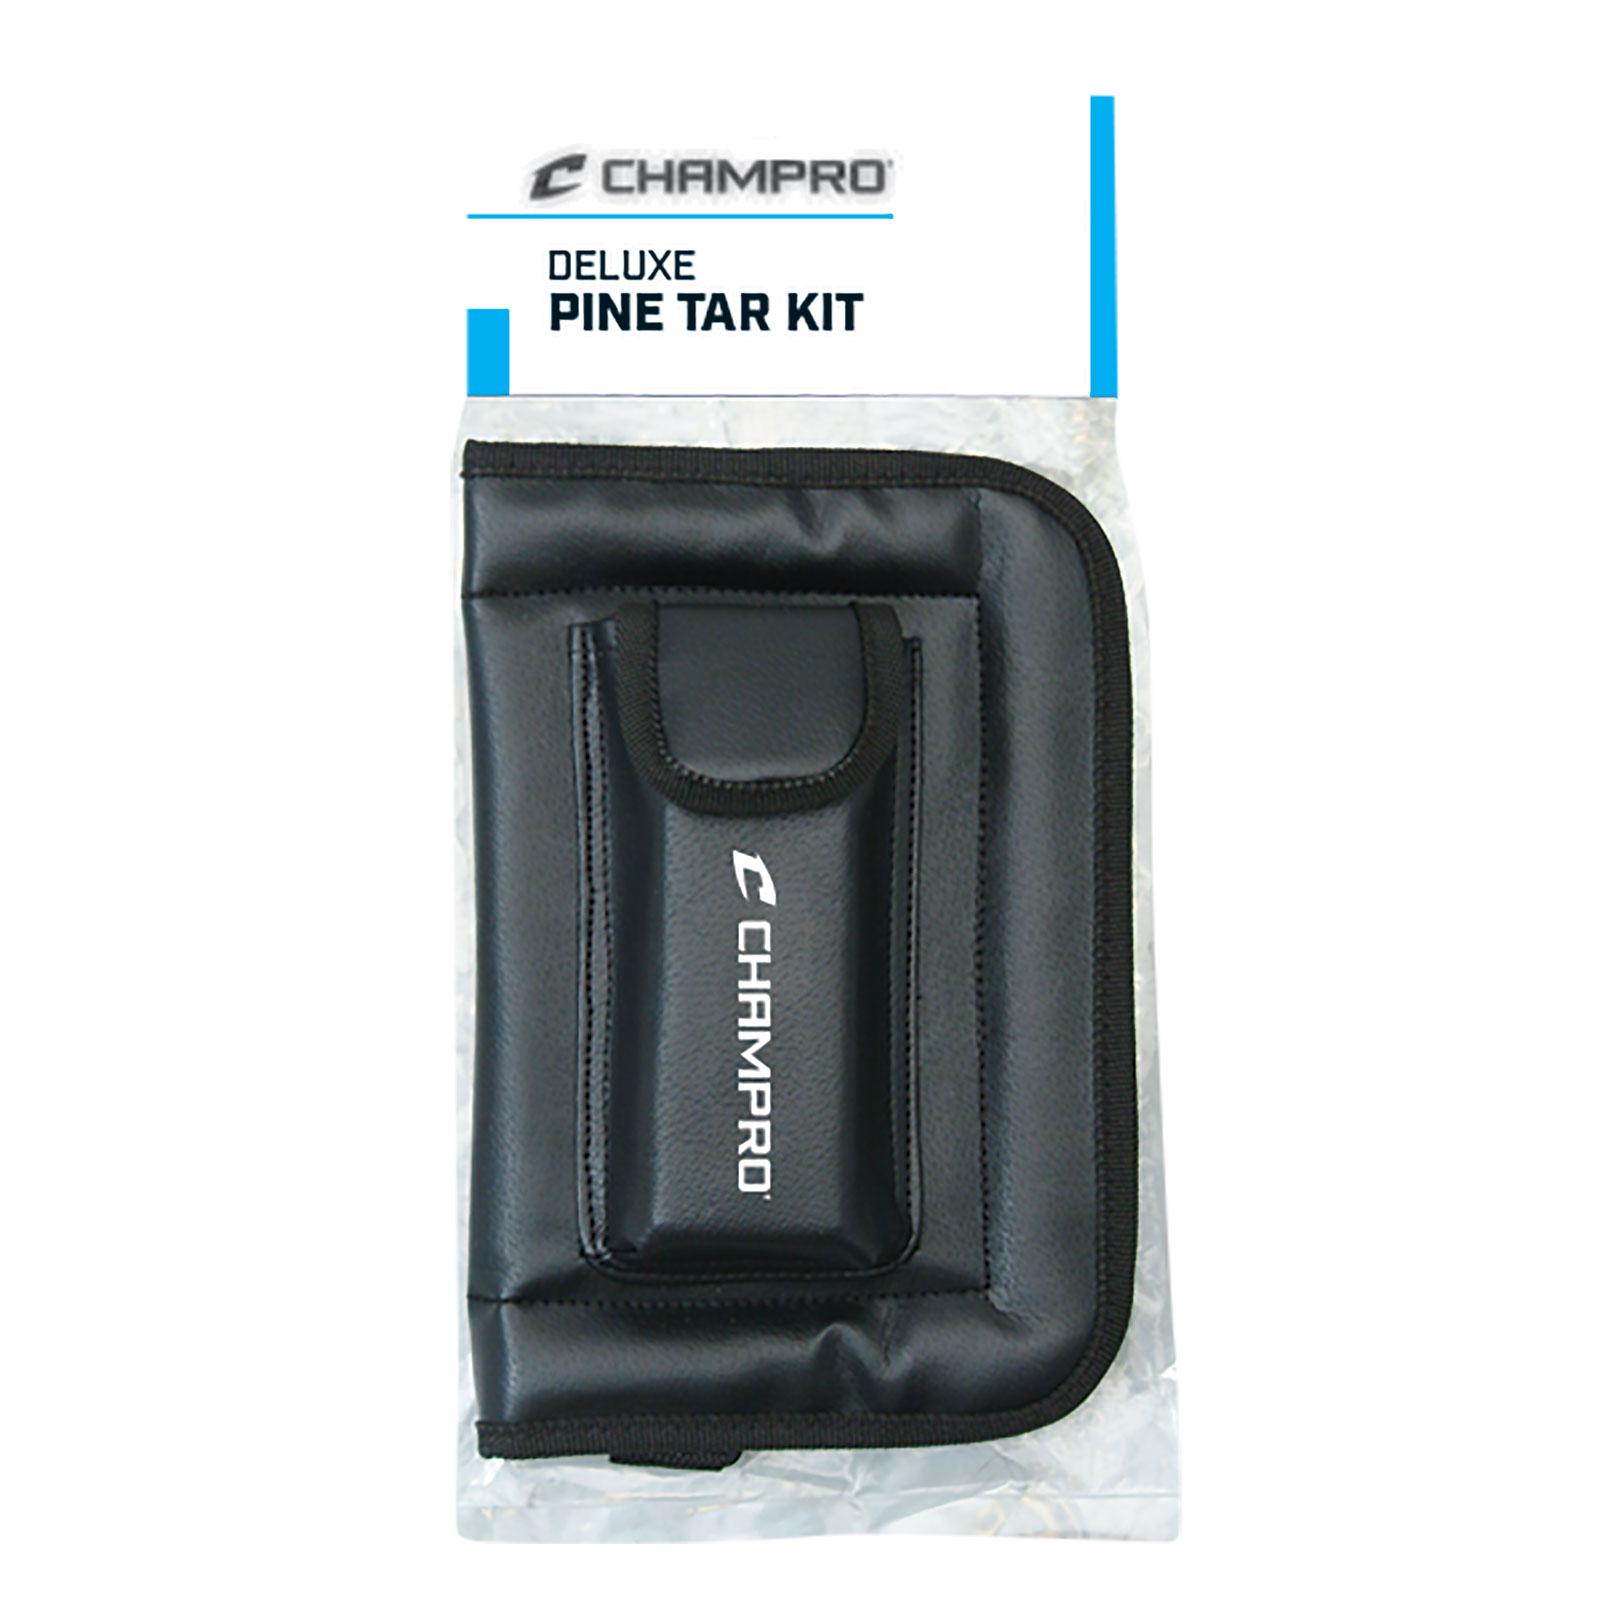 CHAMPRO Deluxe Pine Tar Kit with Applicator and Travel Case - image 1 of 5